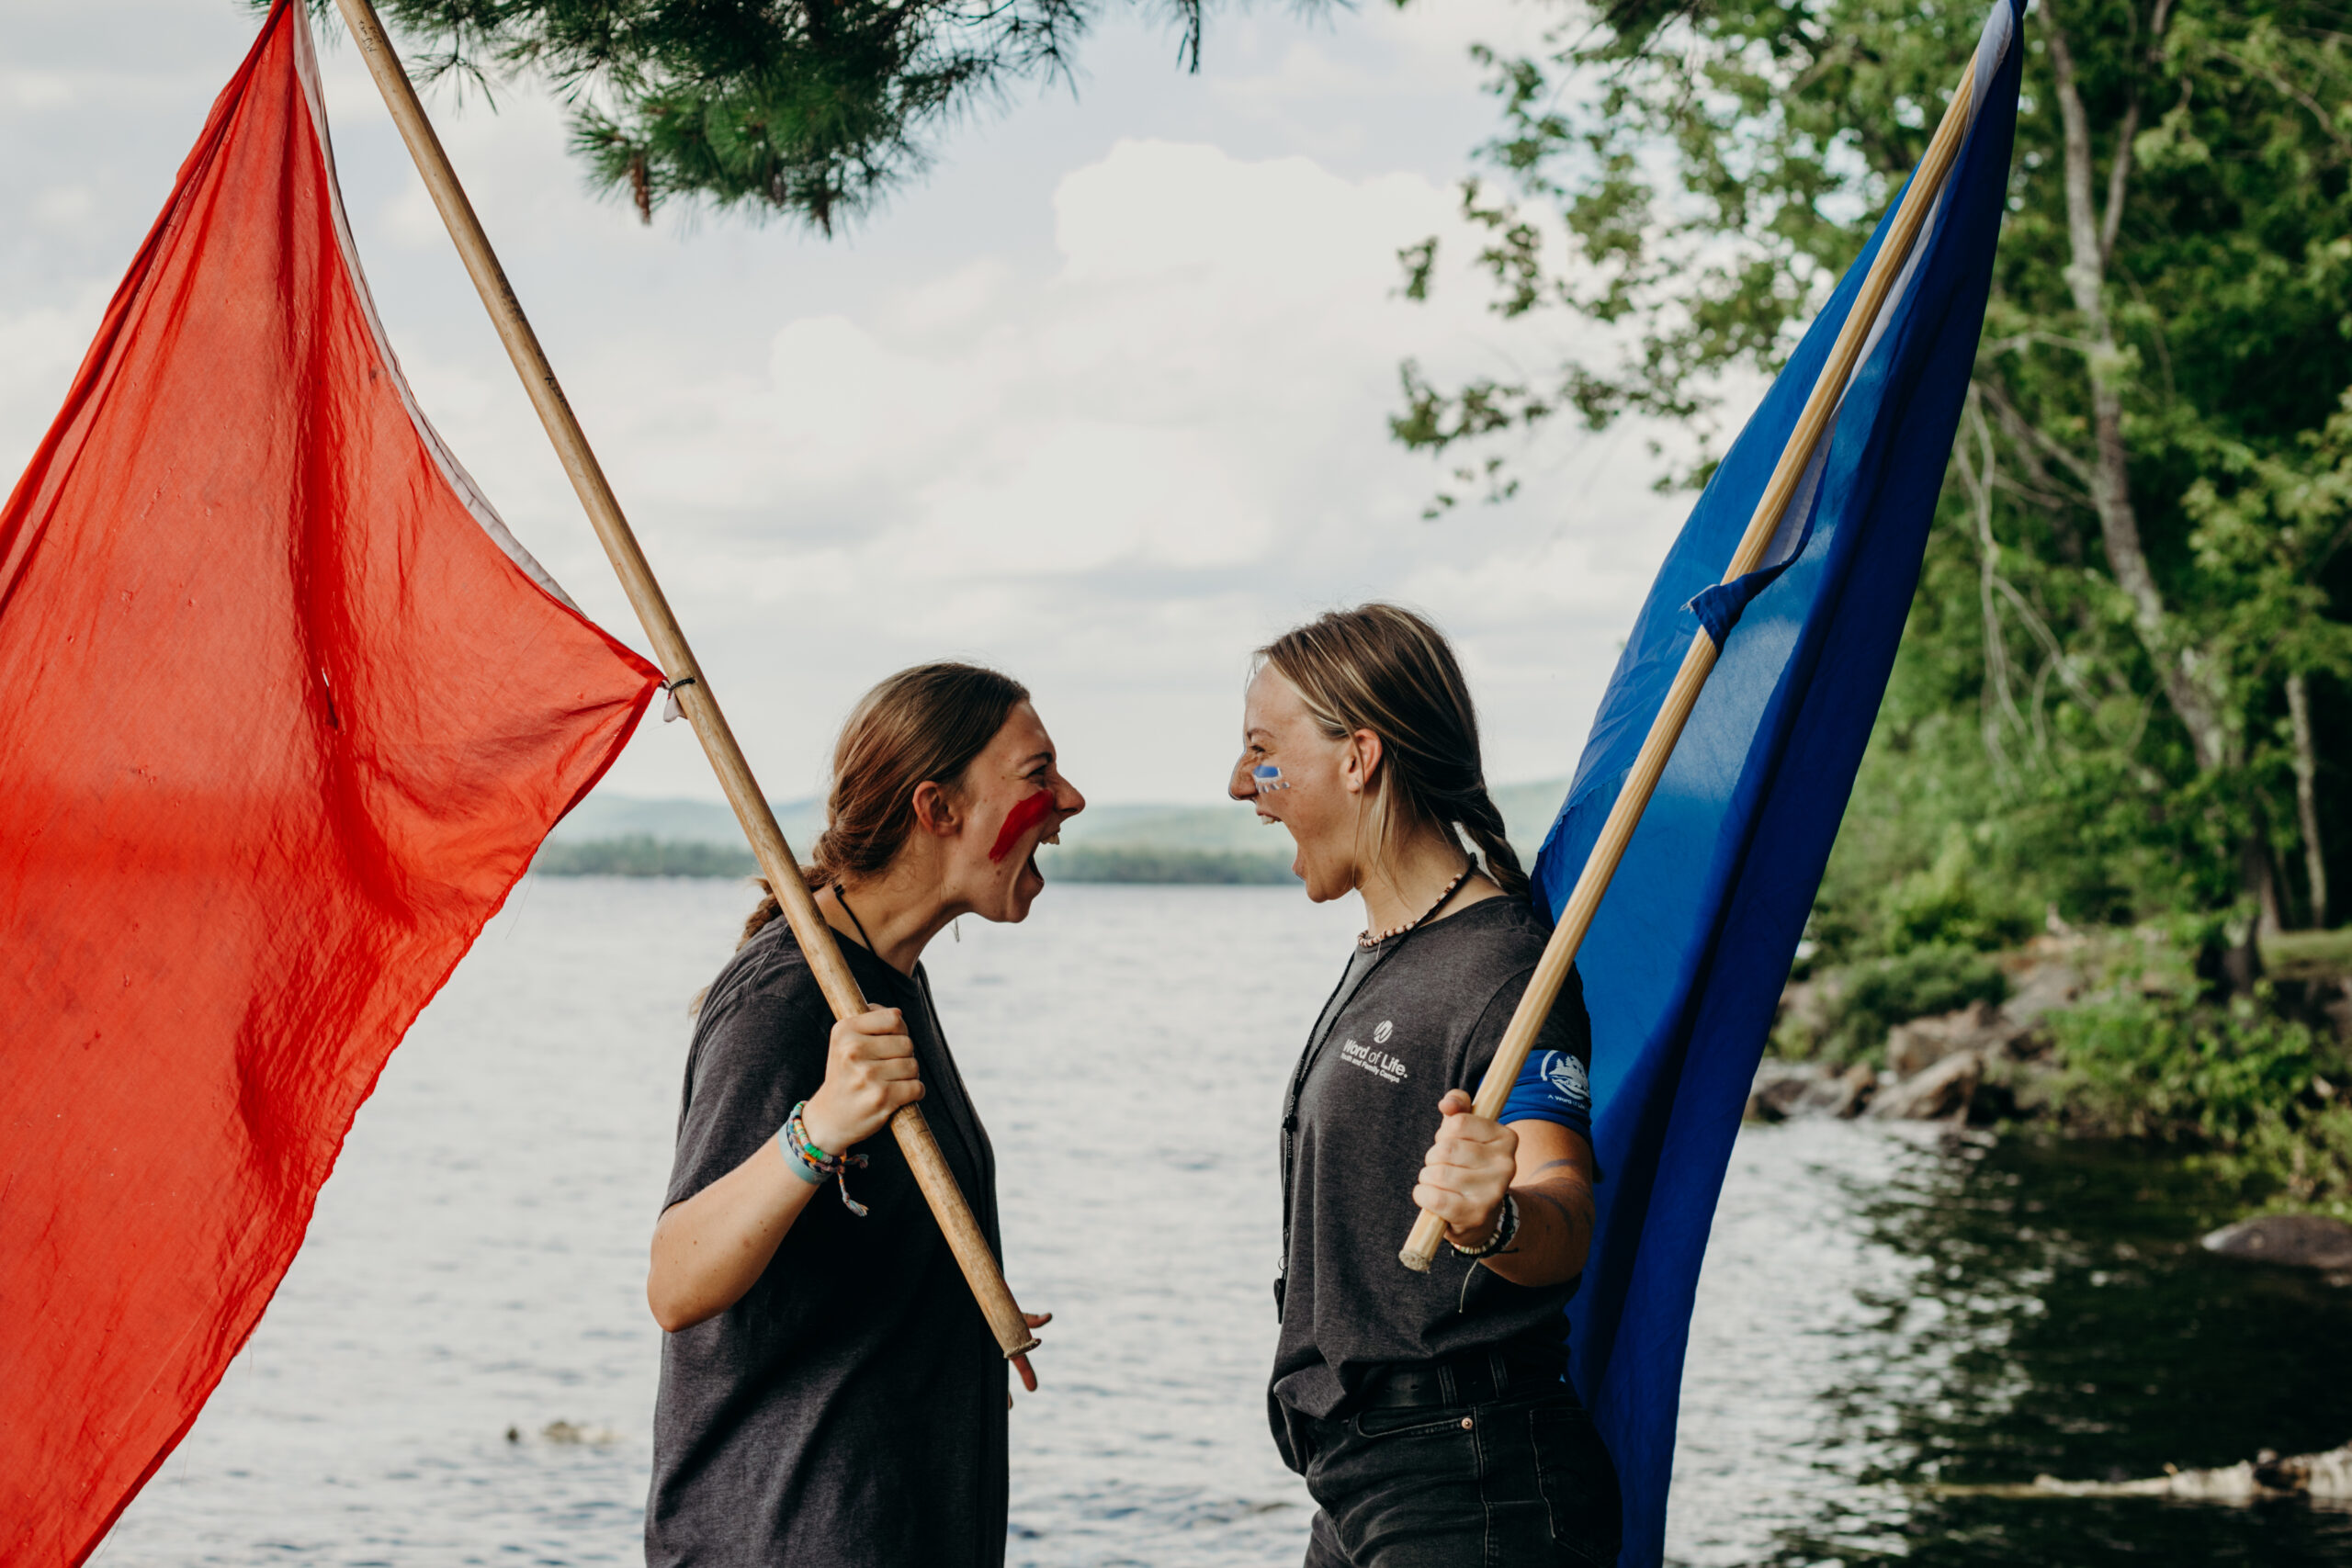 Two women yelling at each other while holding red and blue flags